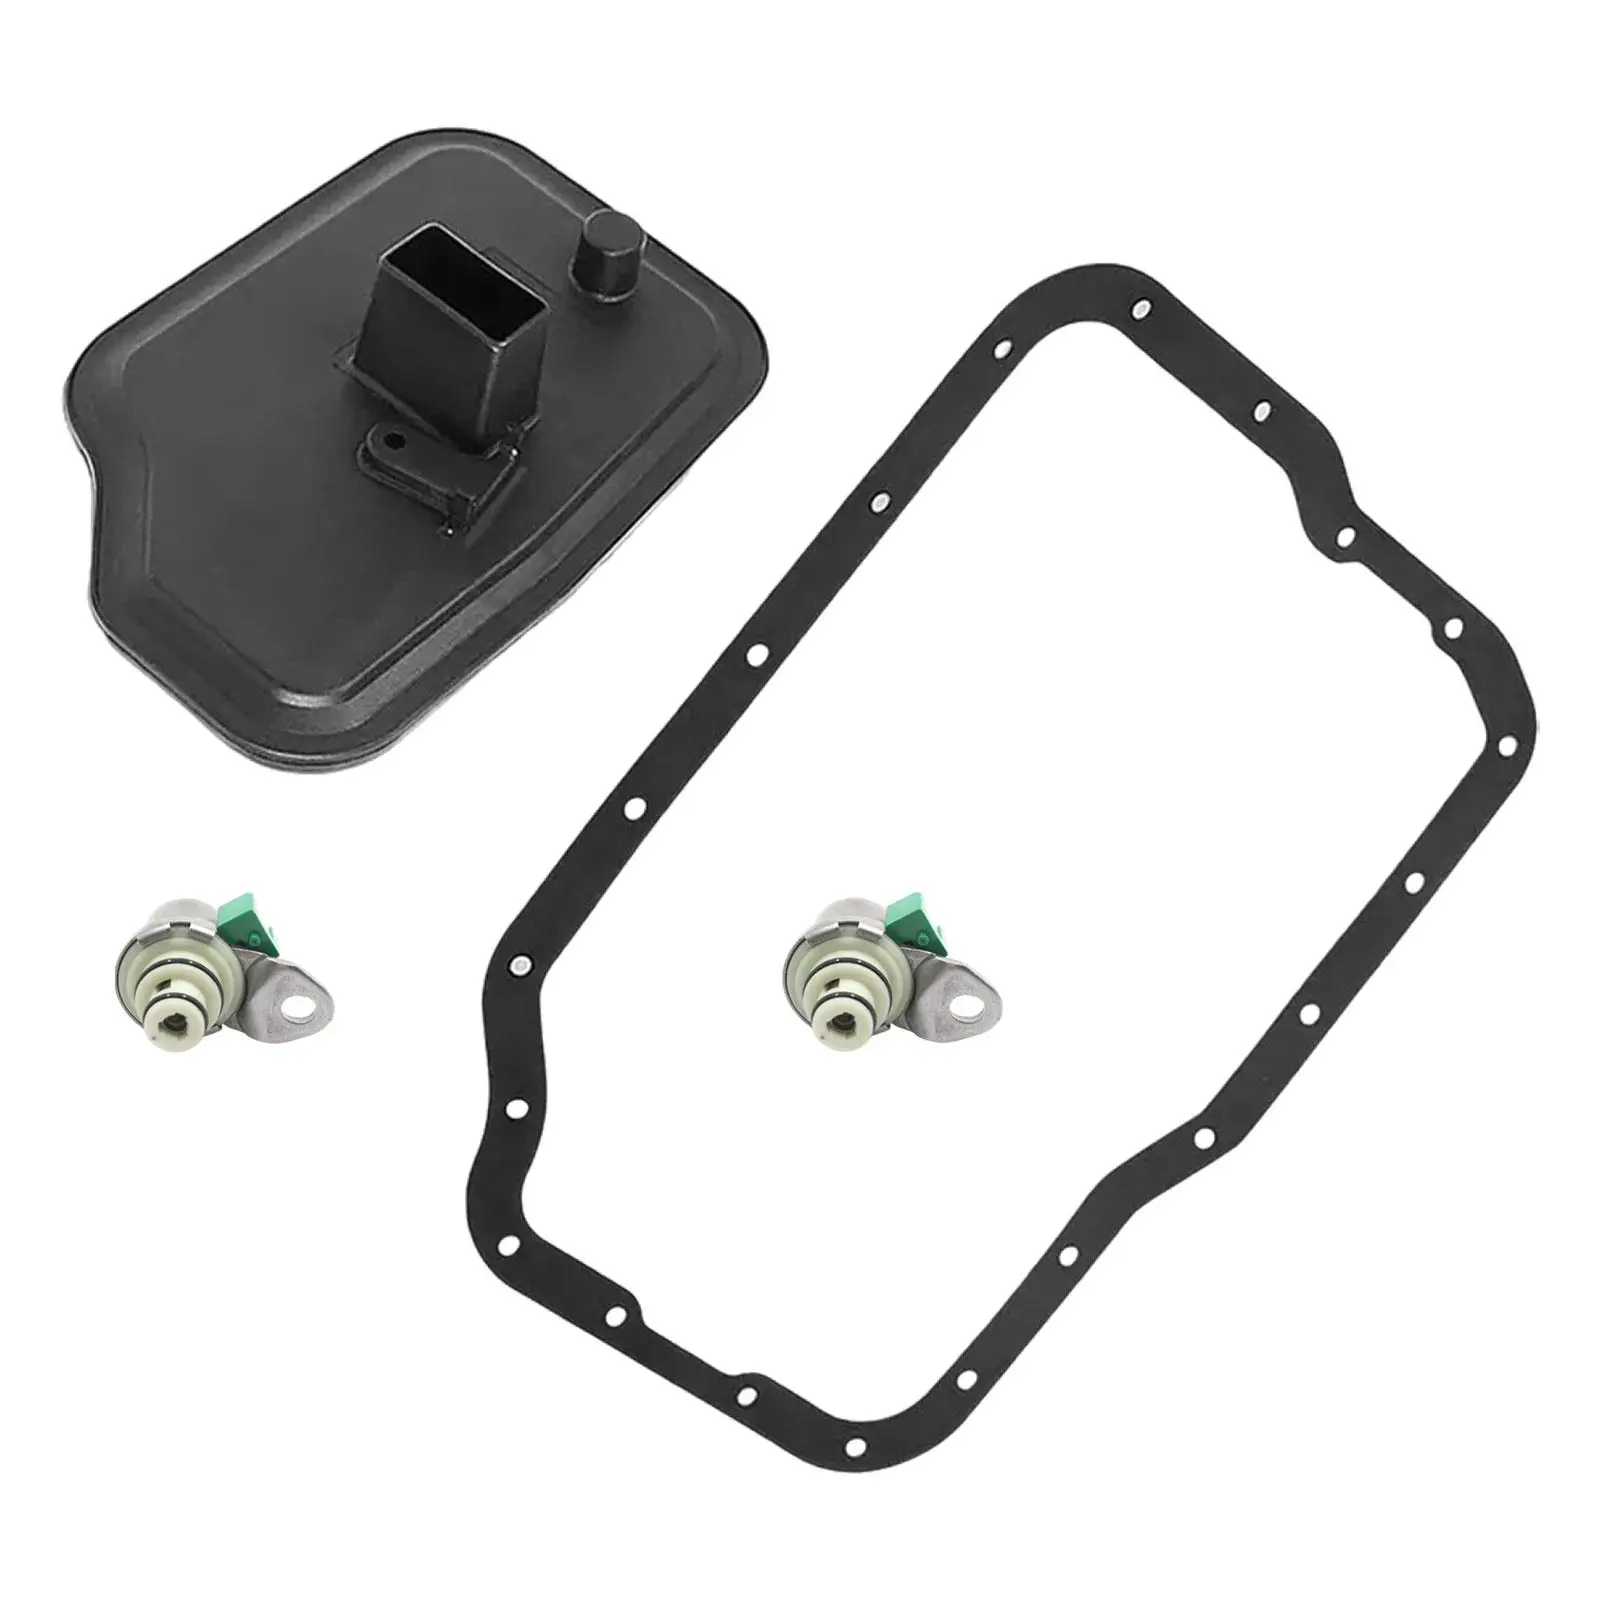 Transmission Filter Pan Gasket Kit with Filter Gasket 4F27E Accessories for Ford Mazda Replacement Durable Easy to Mount